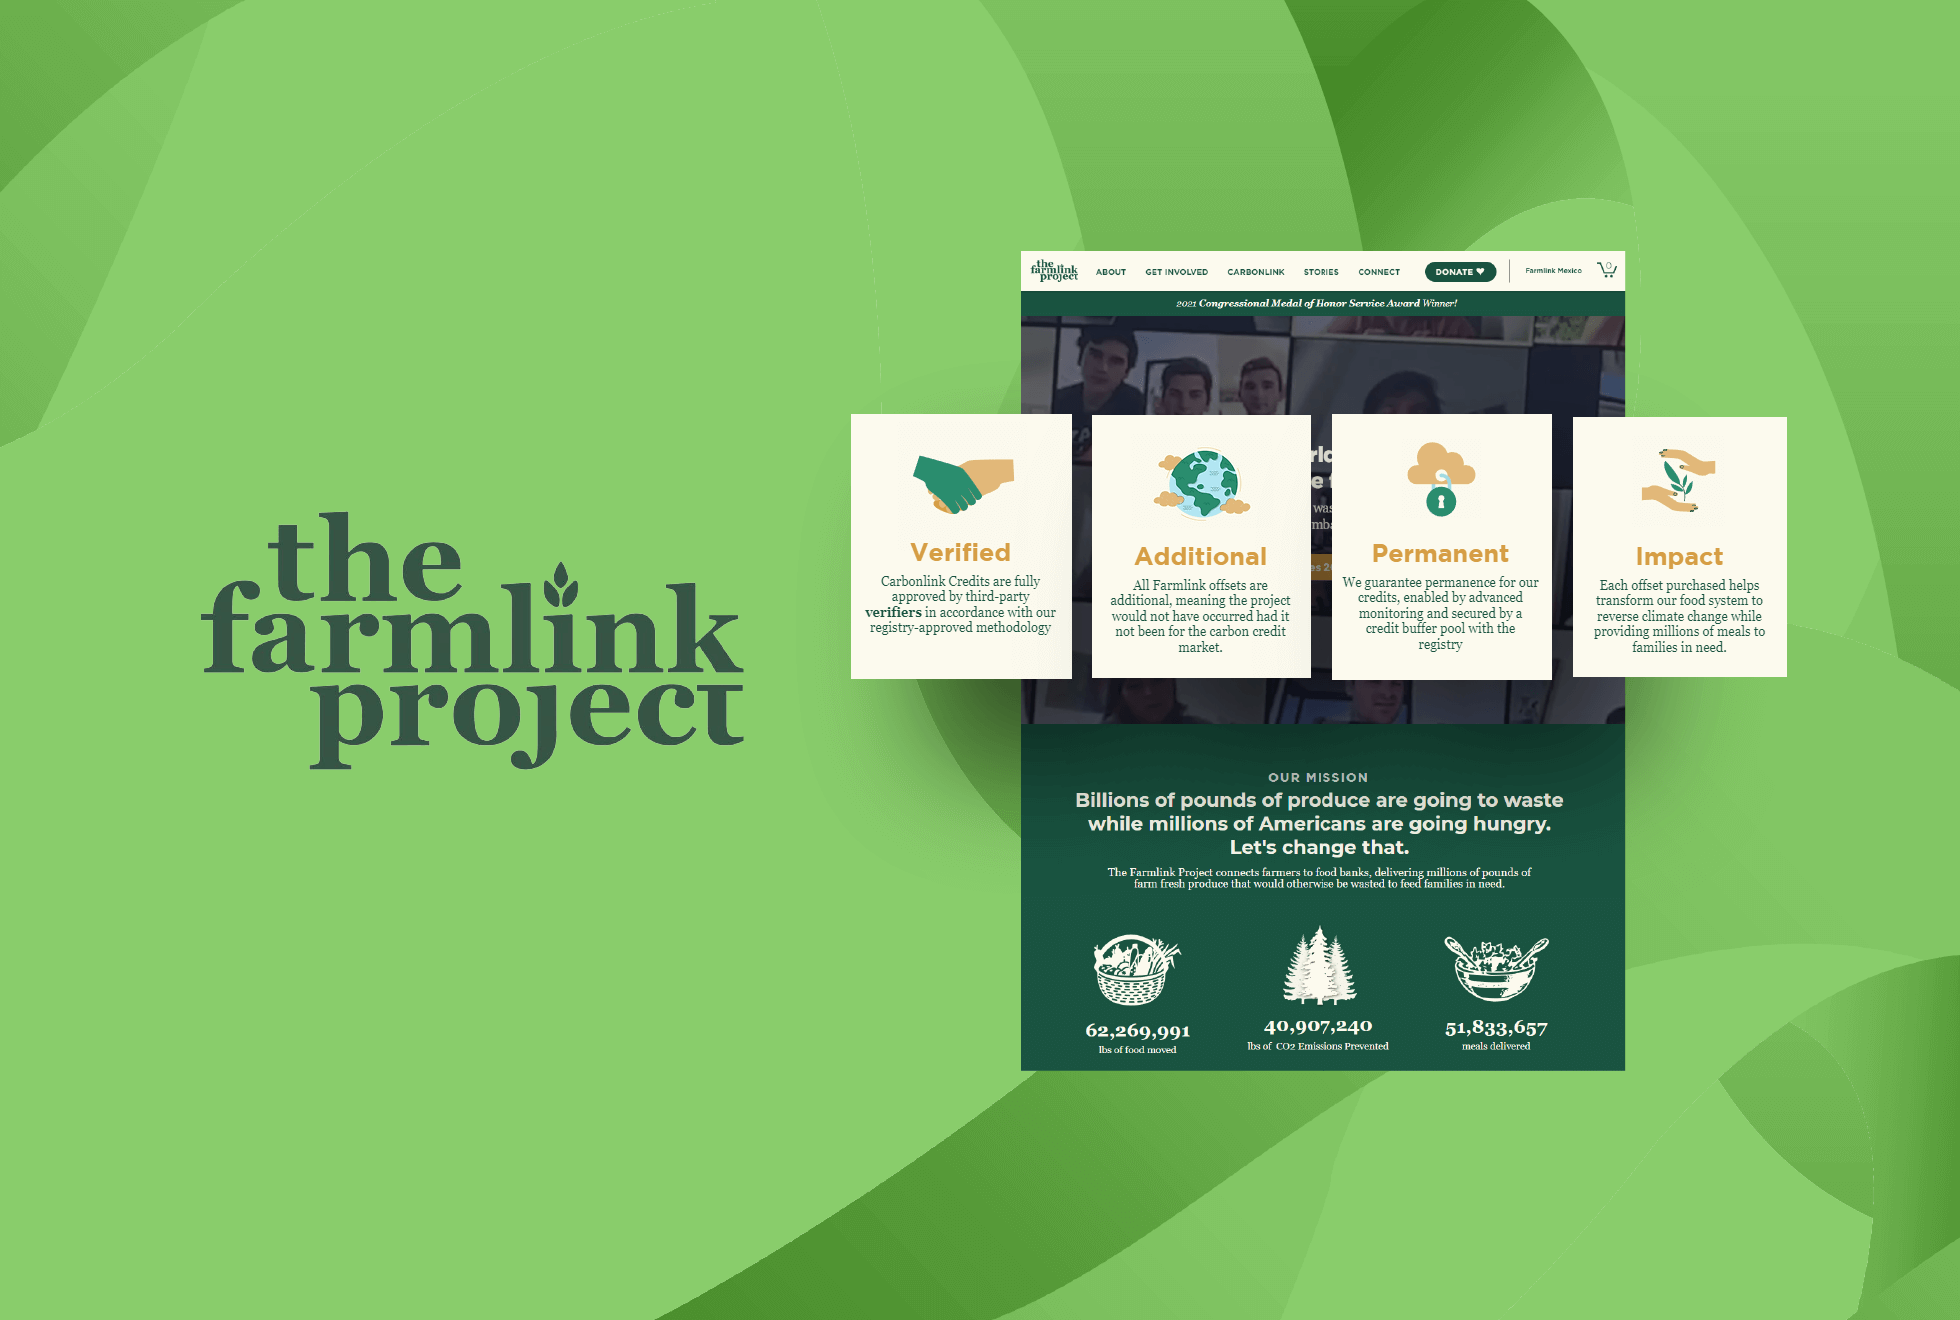 The War On Food Waste Is Here: Meet The Farmlink Project